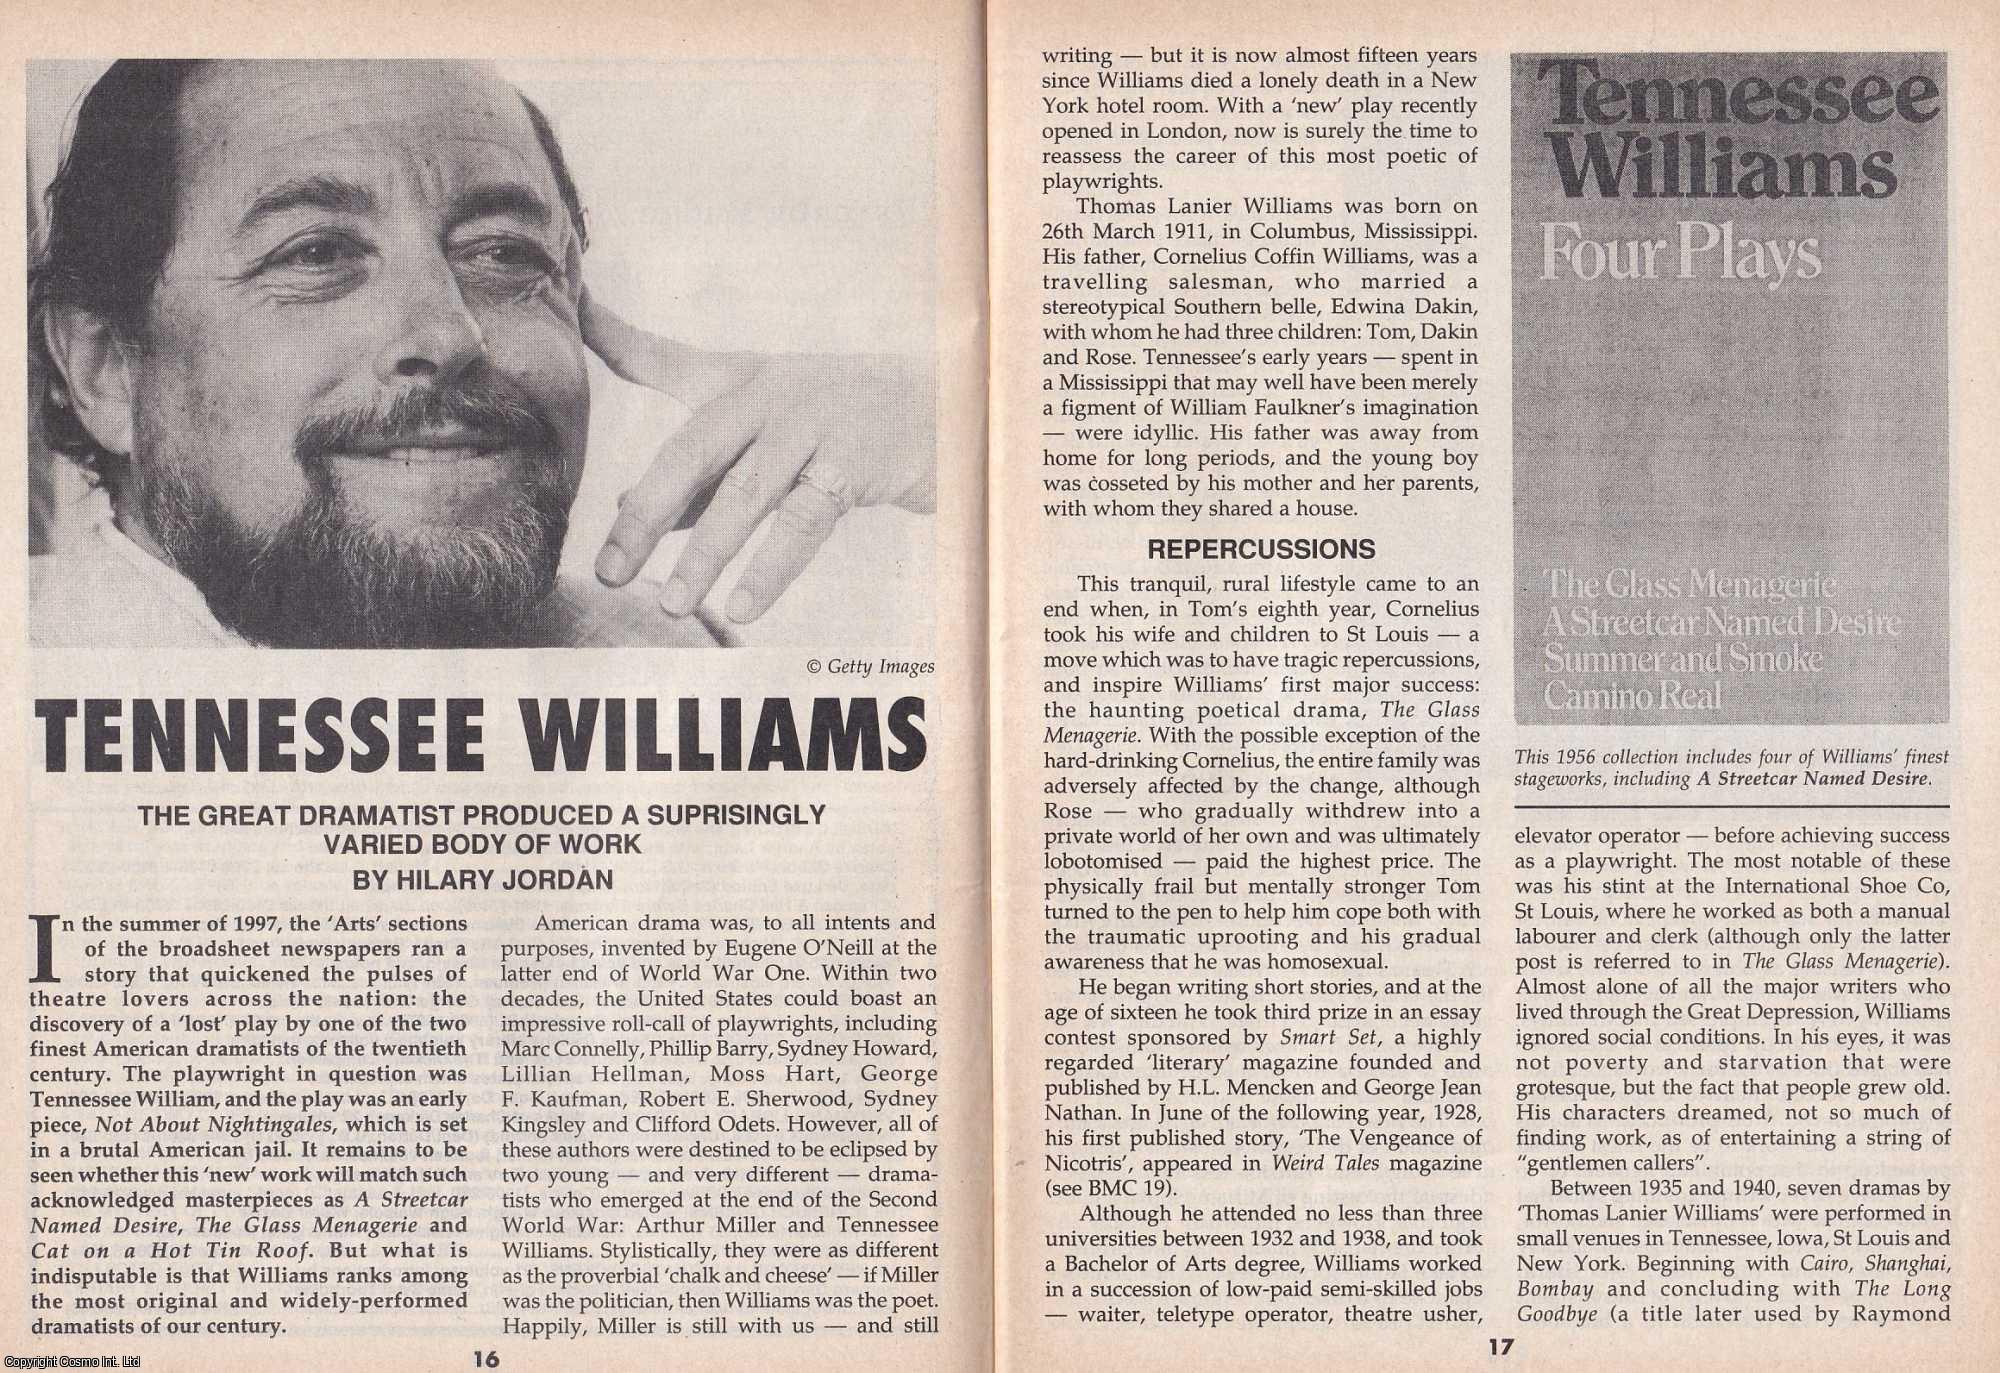 Hilary Jordan - Tennessee Williams. The Great Dramatist Produced a Surprisingly Varied Body of Work. This is an original article separated from an issue of The Book & Magazine Collector publication.